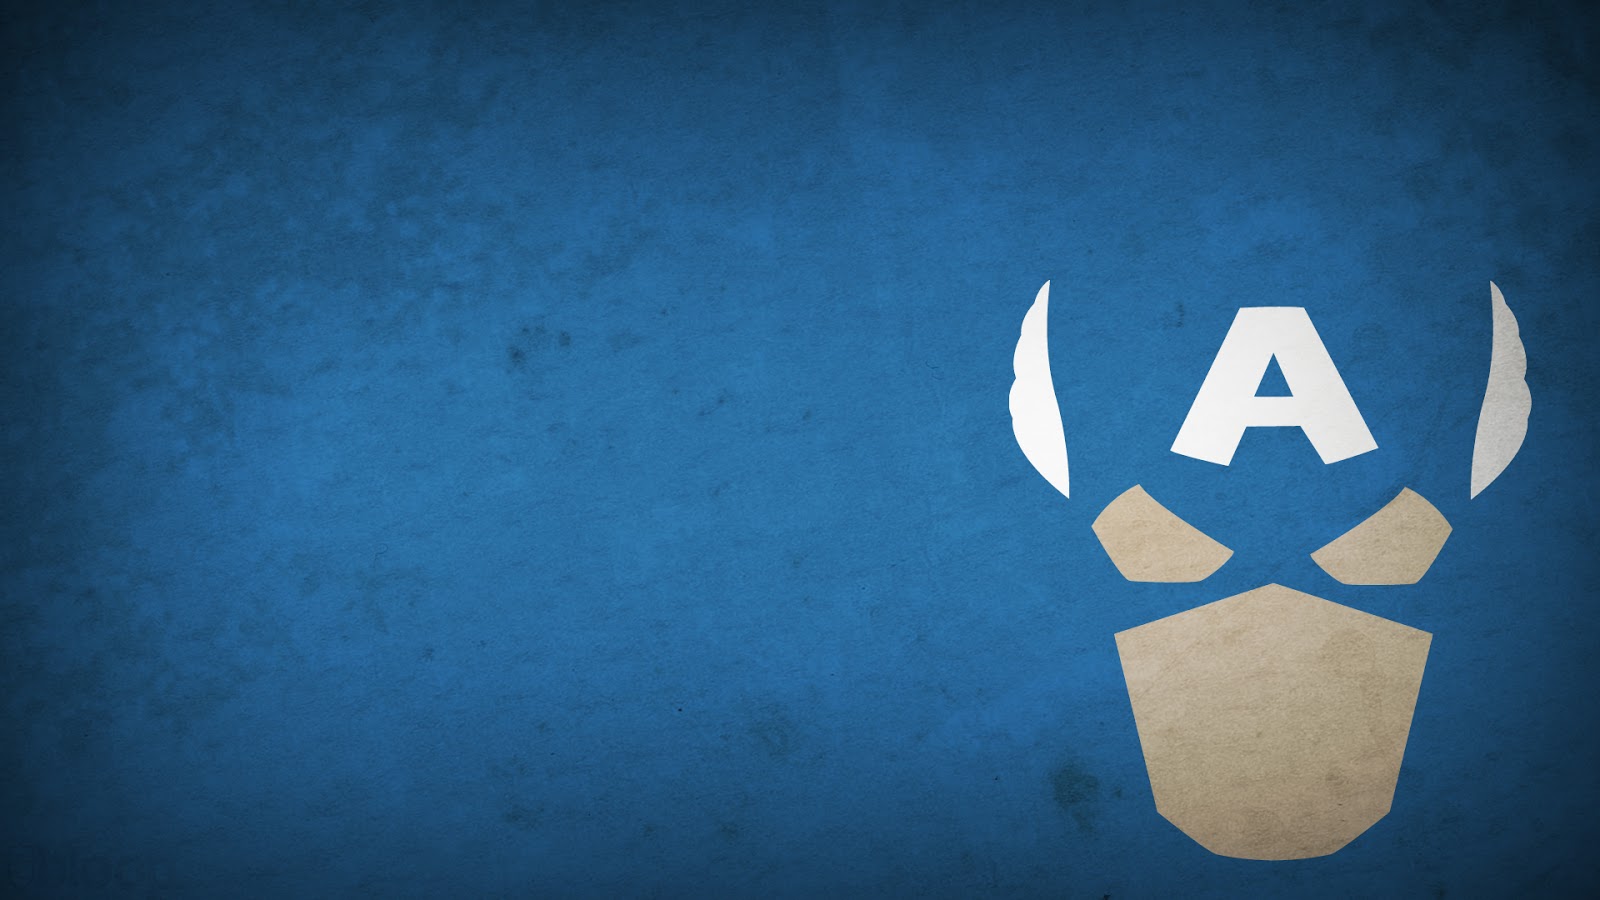 Wallpapers Minimalist Heroes Pack HD 1080p Imagens para photoshop